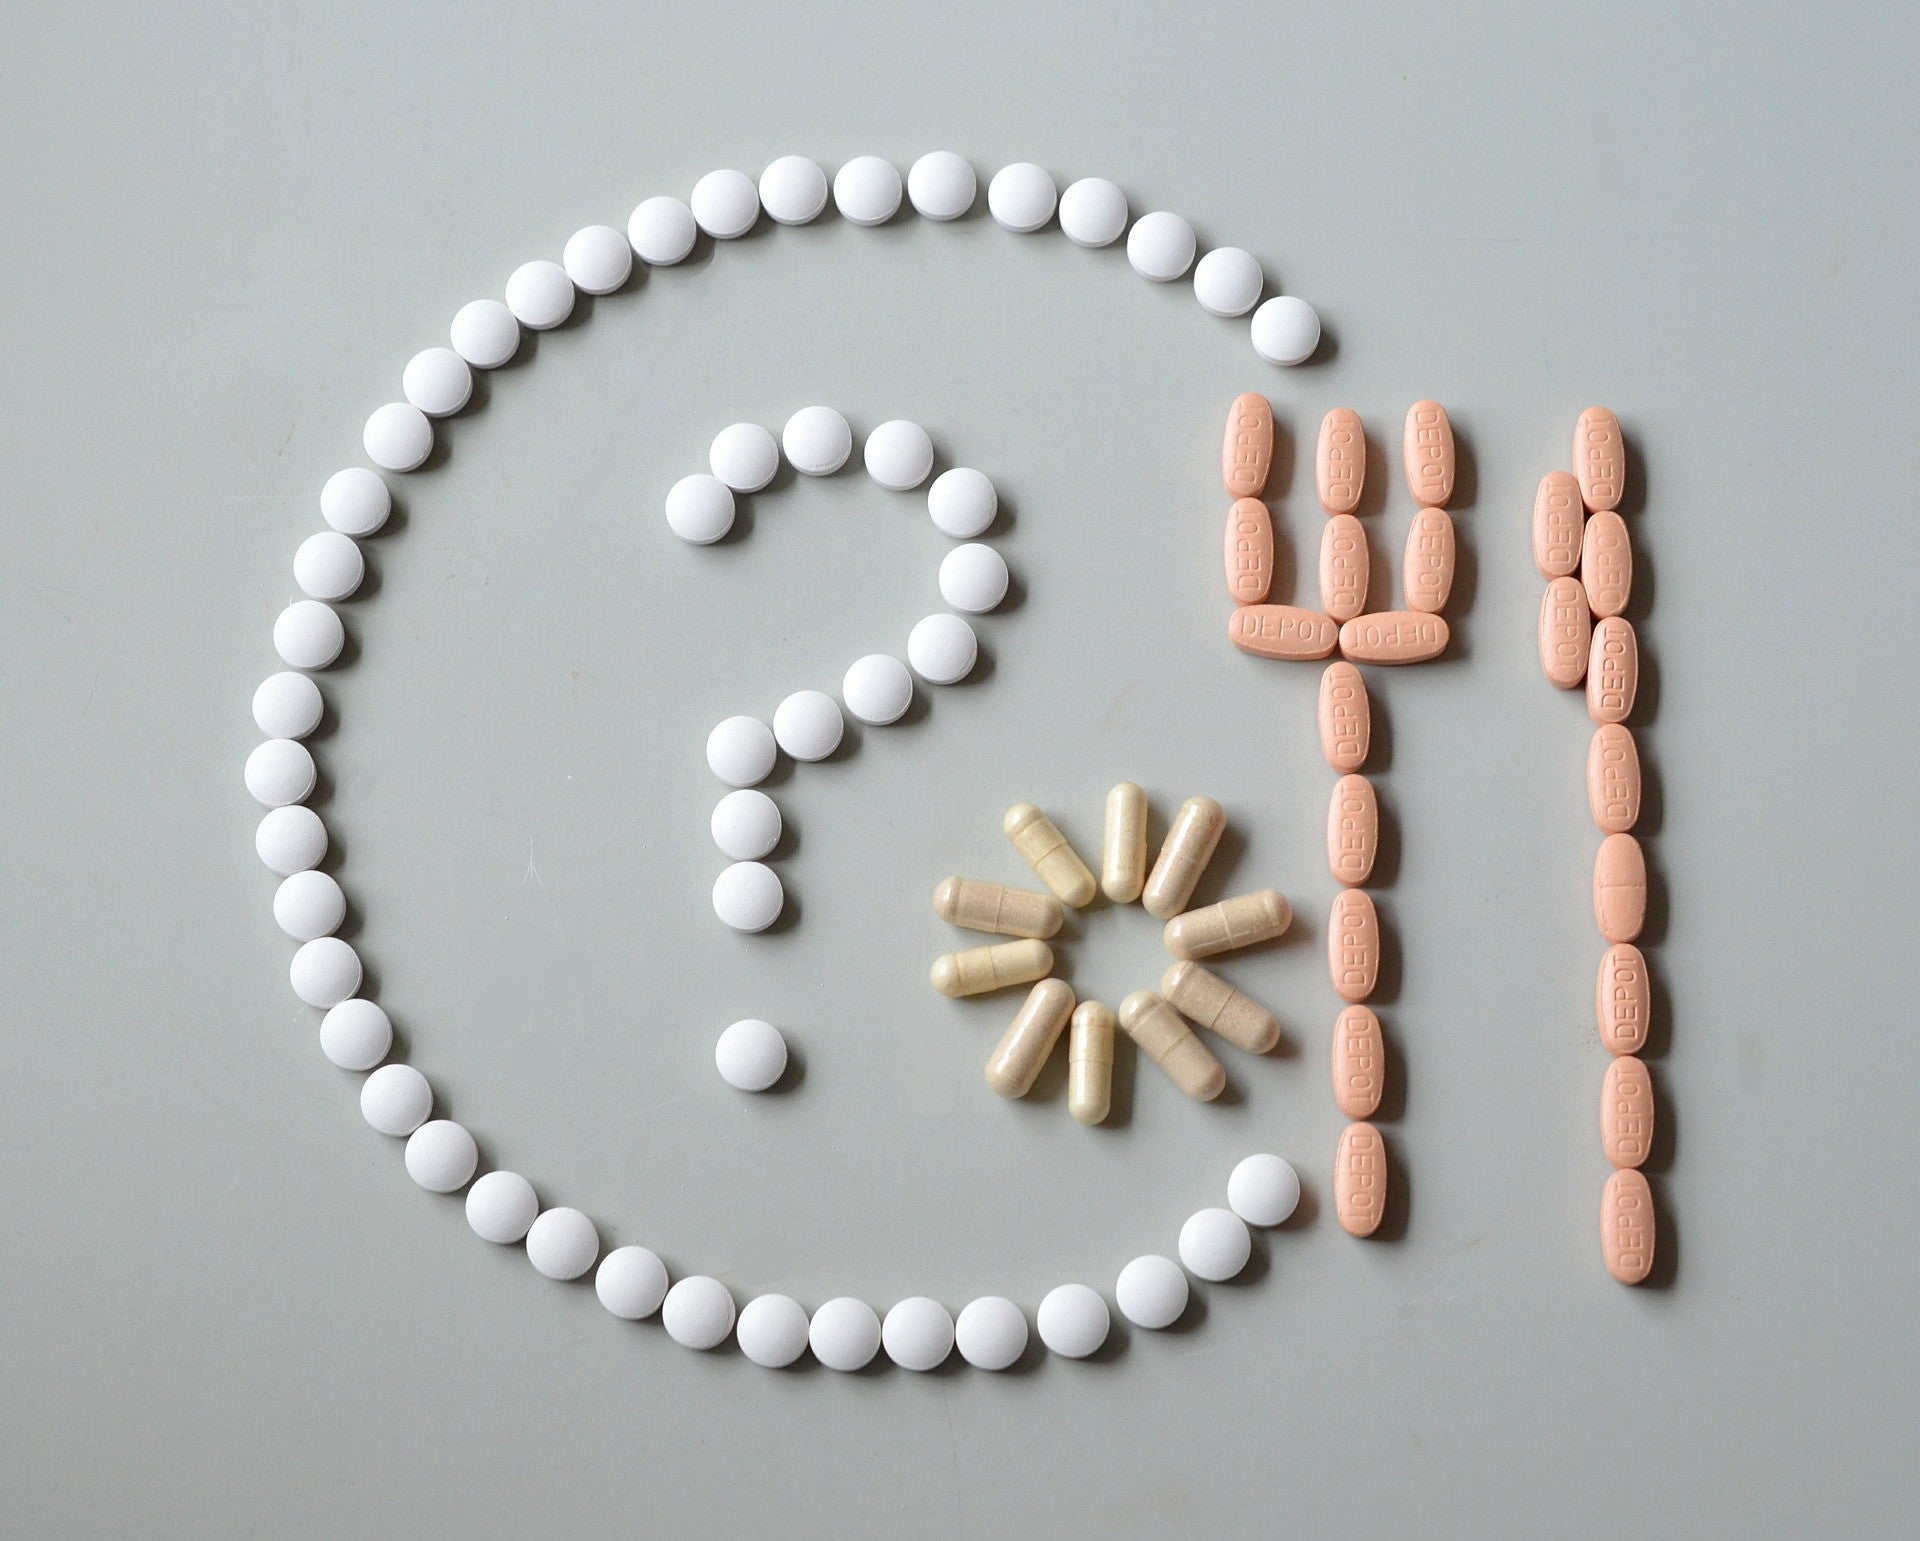 Opiate Tapering: A Safe Alternative To Minimizing Withdrawal Symptoms